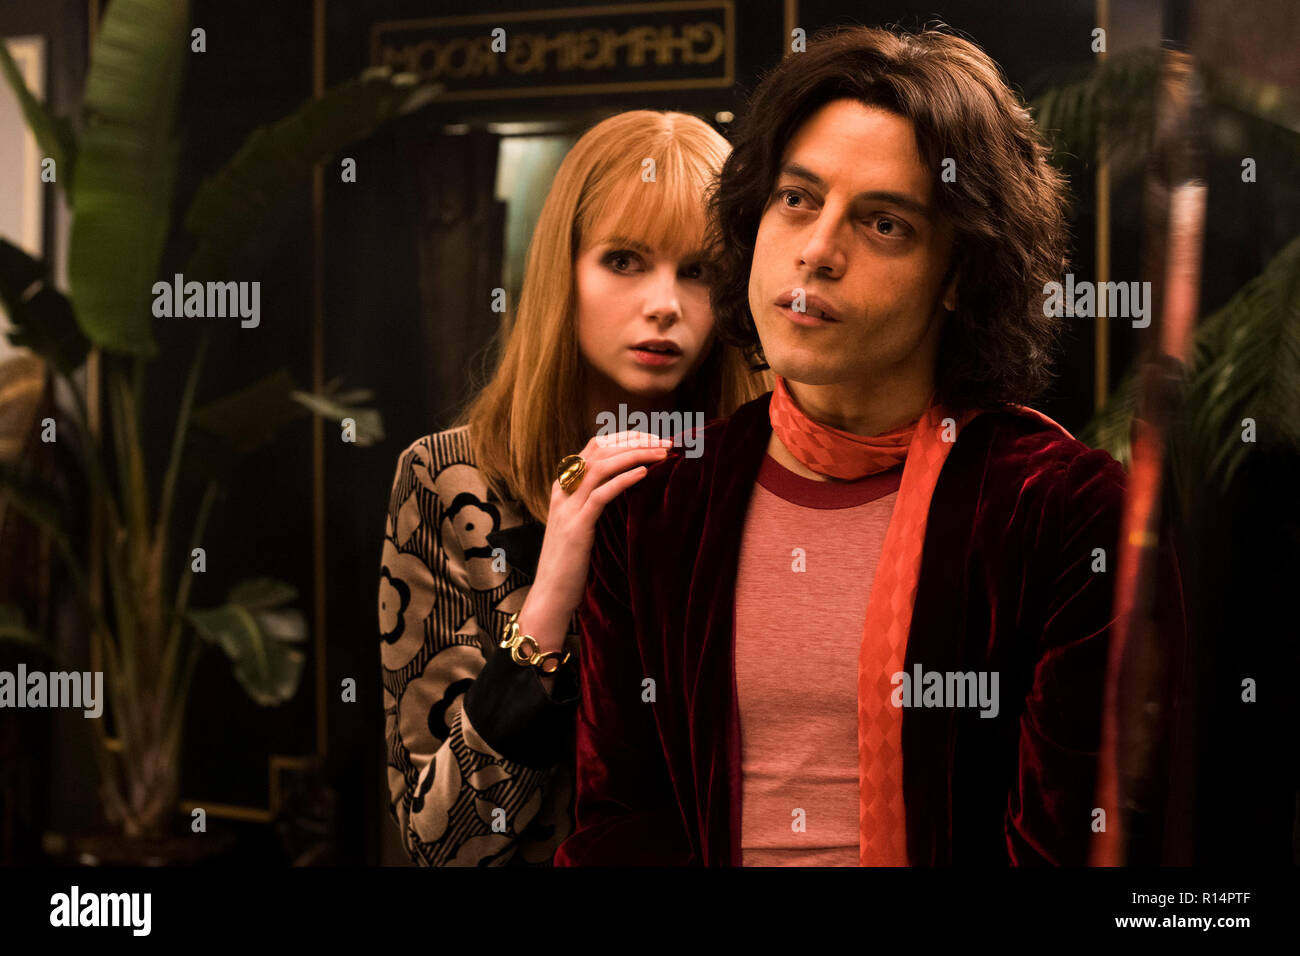 RELEASE DATE: November 2, 2018 TITLE: Bohemian Rhapsody STUDIO: Twentieth Century Fox DIRECTOR: Bryan Singer PLOT: The cast and producer of Bohemian Rhapsody share what it was like bringing the story of Freddie Mercury and Queen to the big screen. STARRING: LUCY BOYNTON as Mary Austin, RAMI MALEK as Freddie Mercury. (Credit Image: © Twentieth Century Fox/Entertainment Pictures) Stock Photo